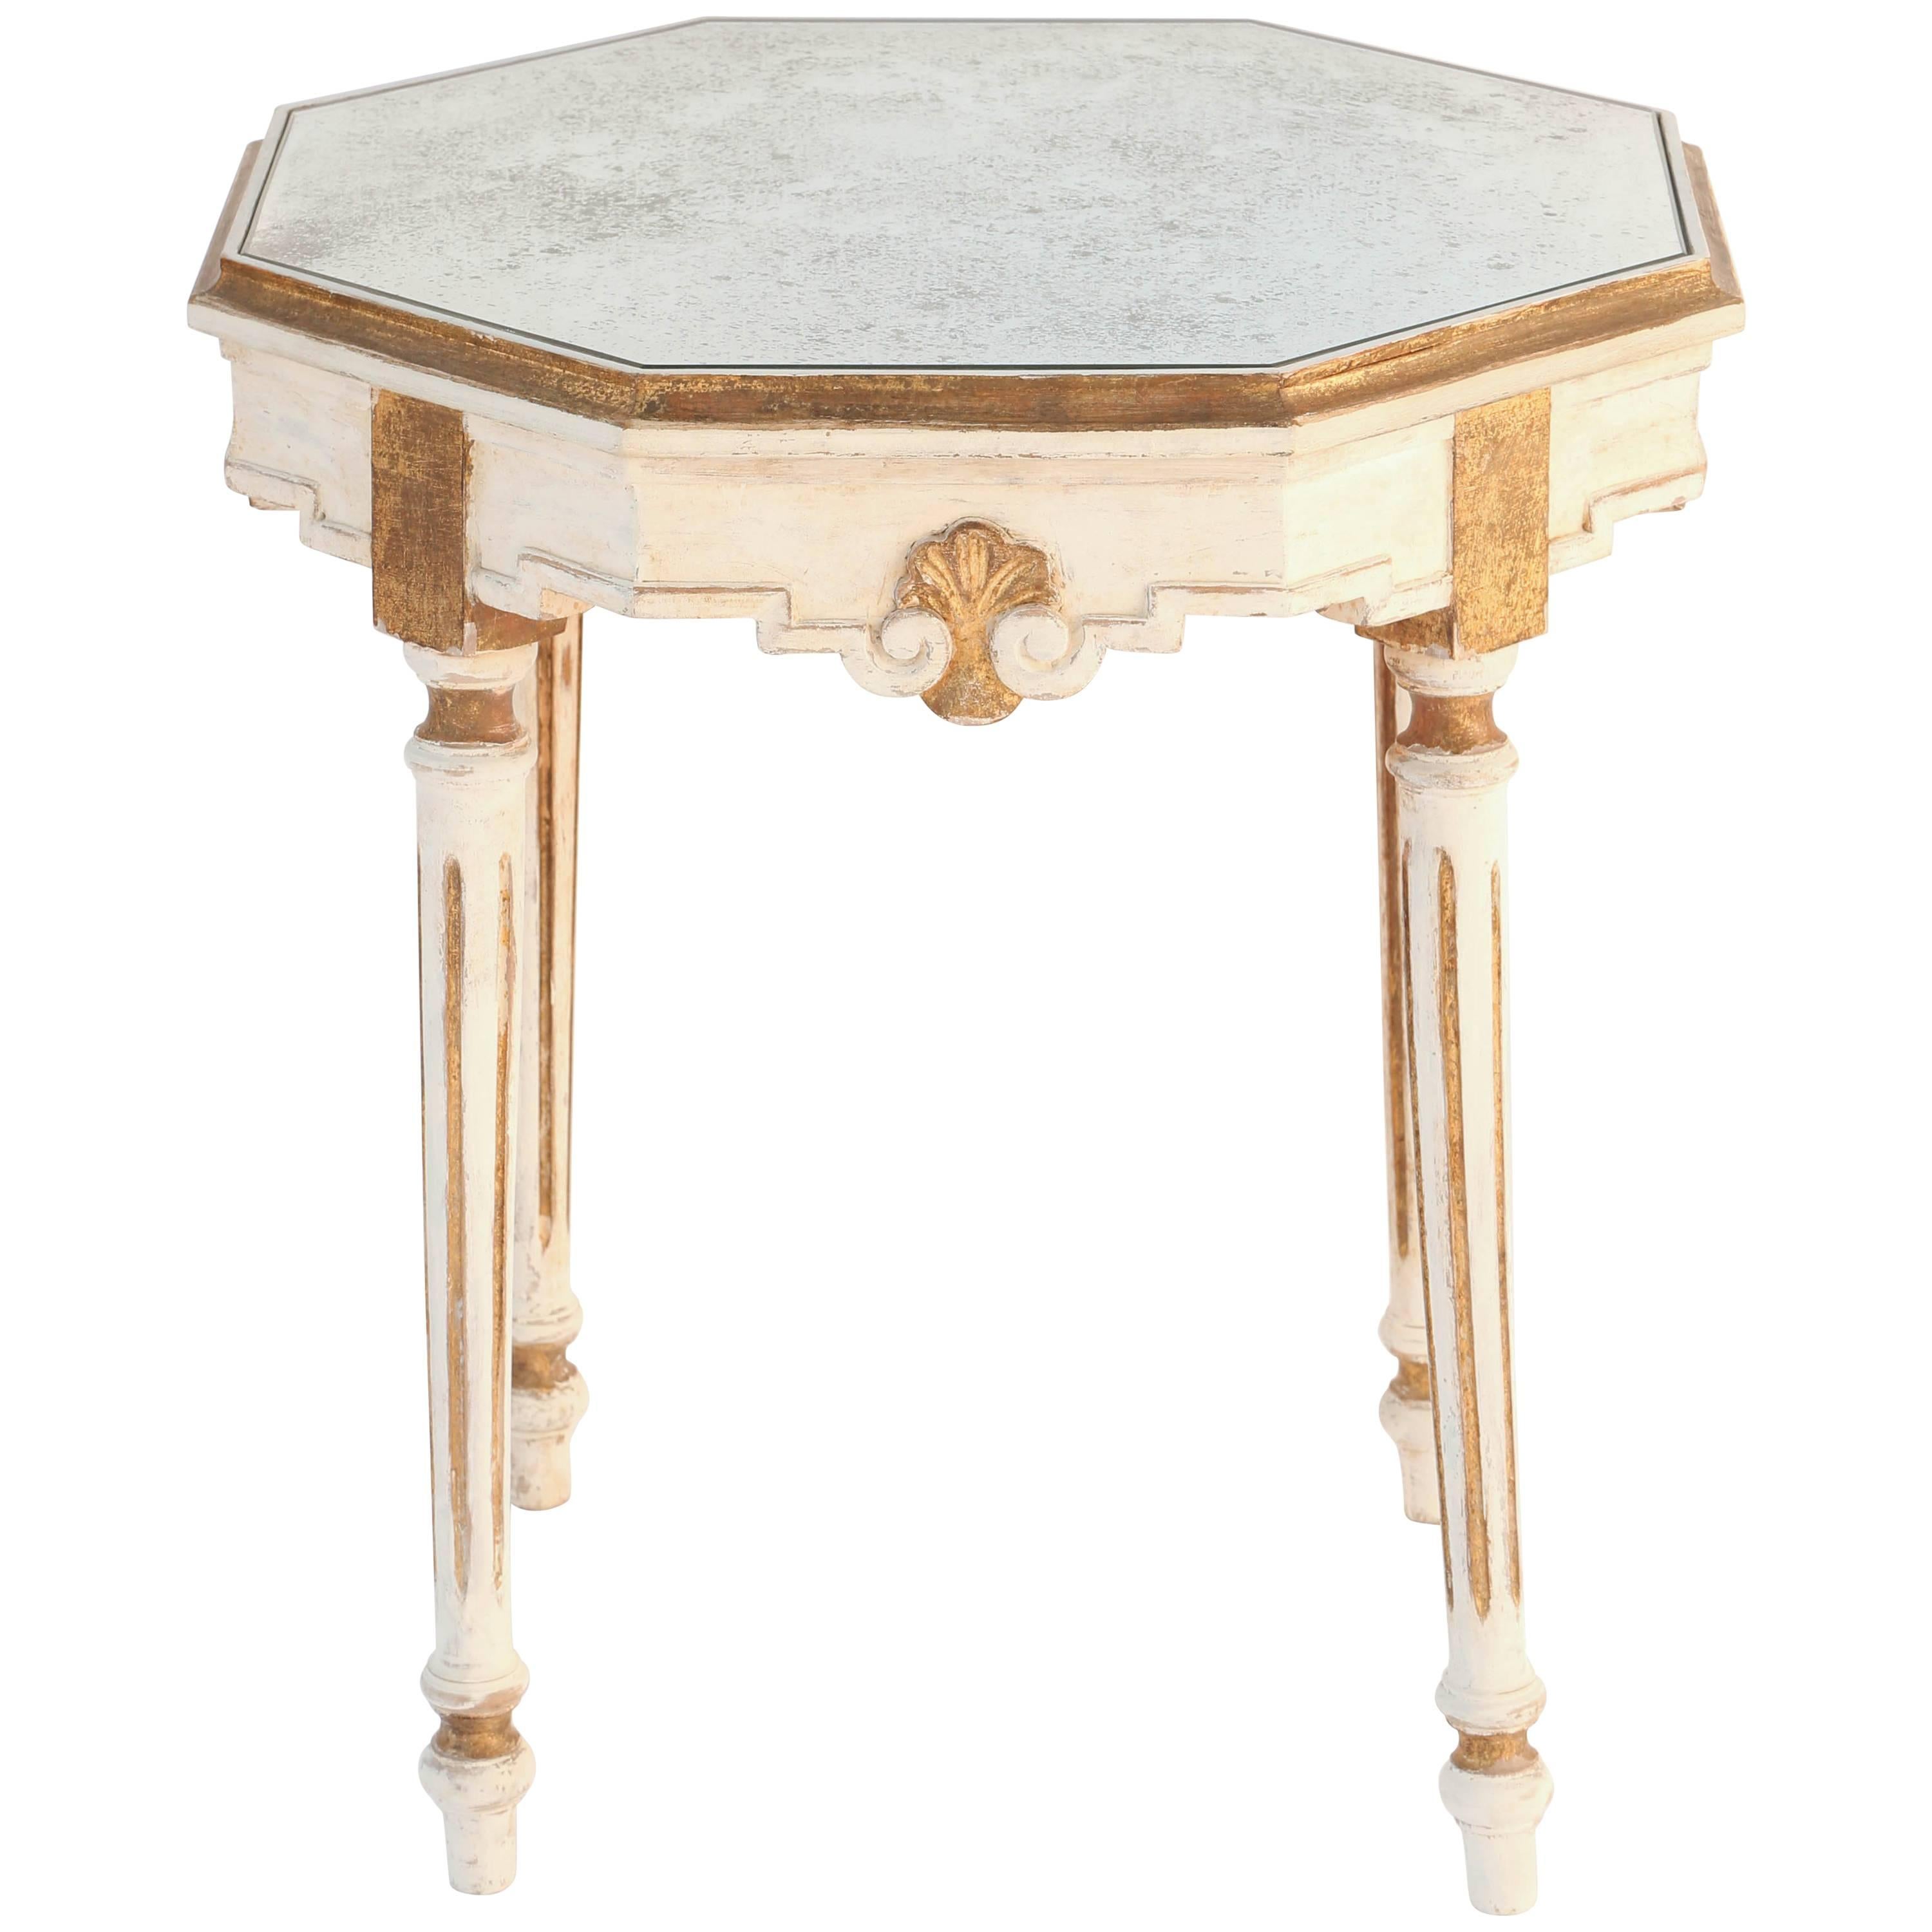 Painted and Parcel-Gilt Italian Accent Table with Octagonal Mirrored Top